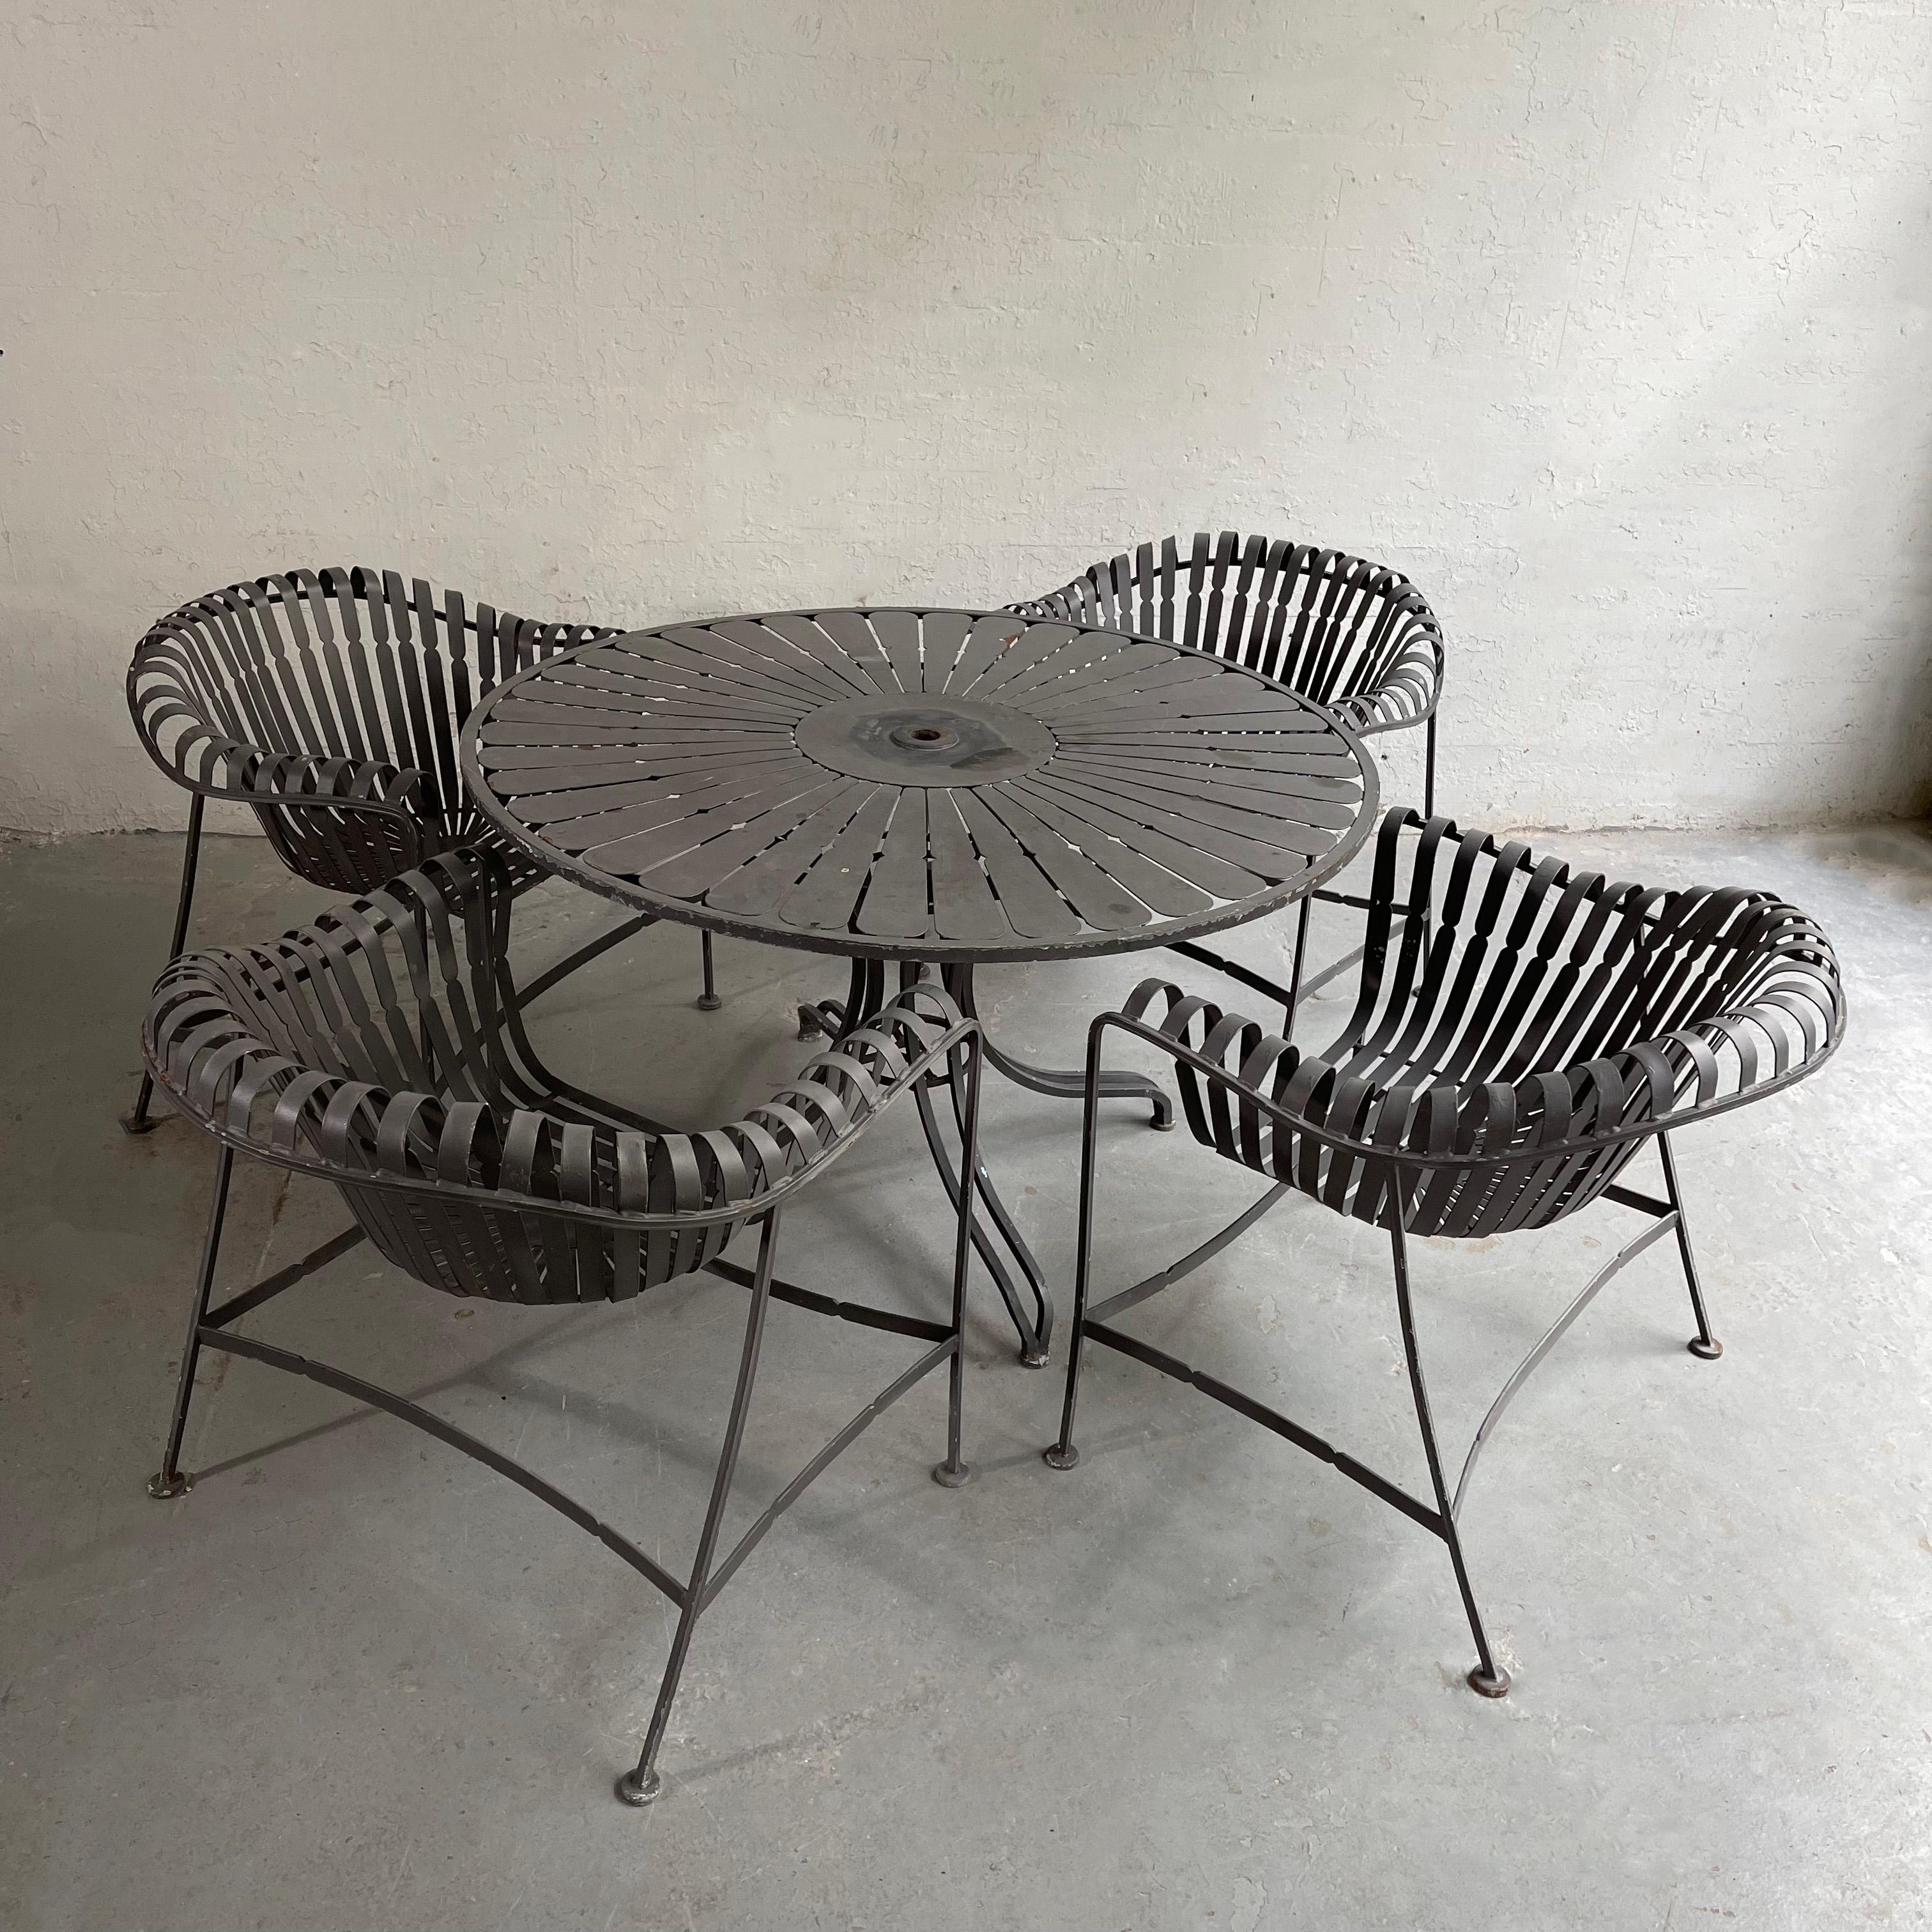 Midcentury, painted wrought iron, garden, patio, dining set with round, sunburst table and four strap iron armchairs by Woodard Furniture is also reminiscent of French garden furniture in the manner of Francois Carre´. A lovely, unique dining set